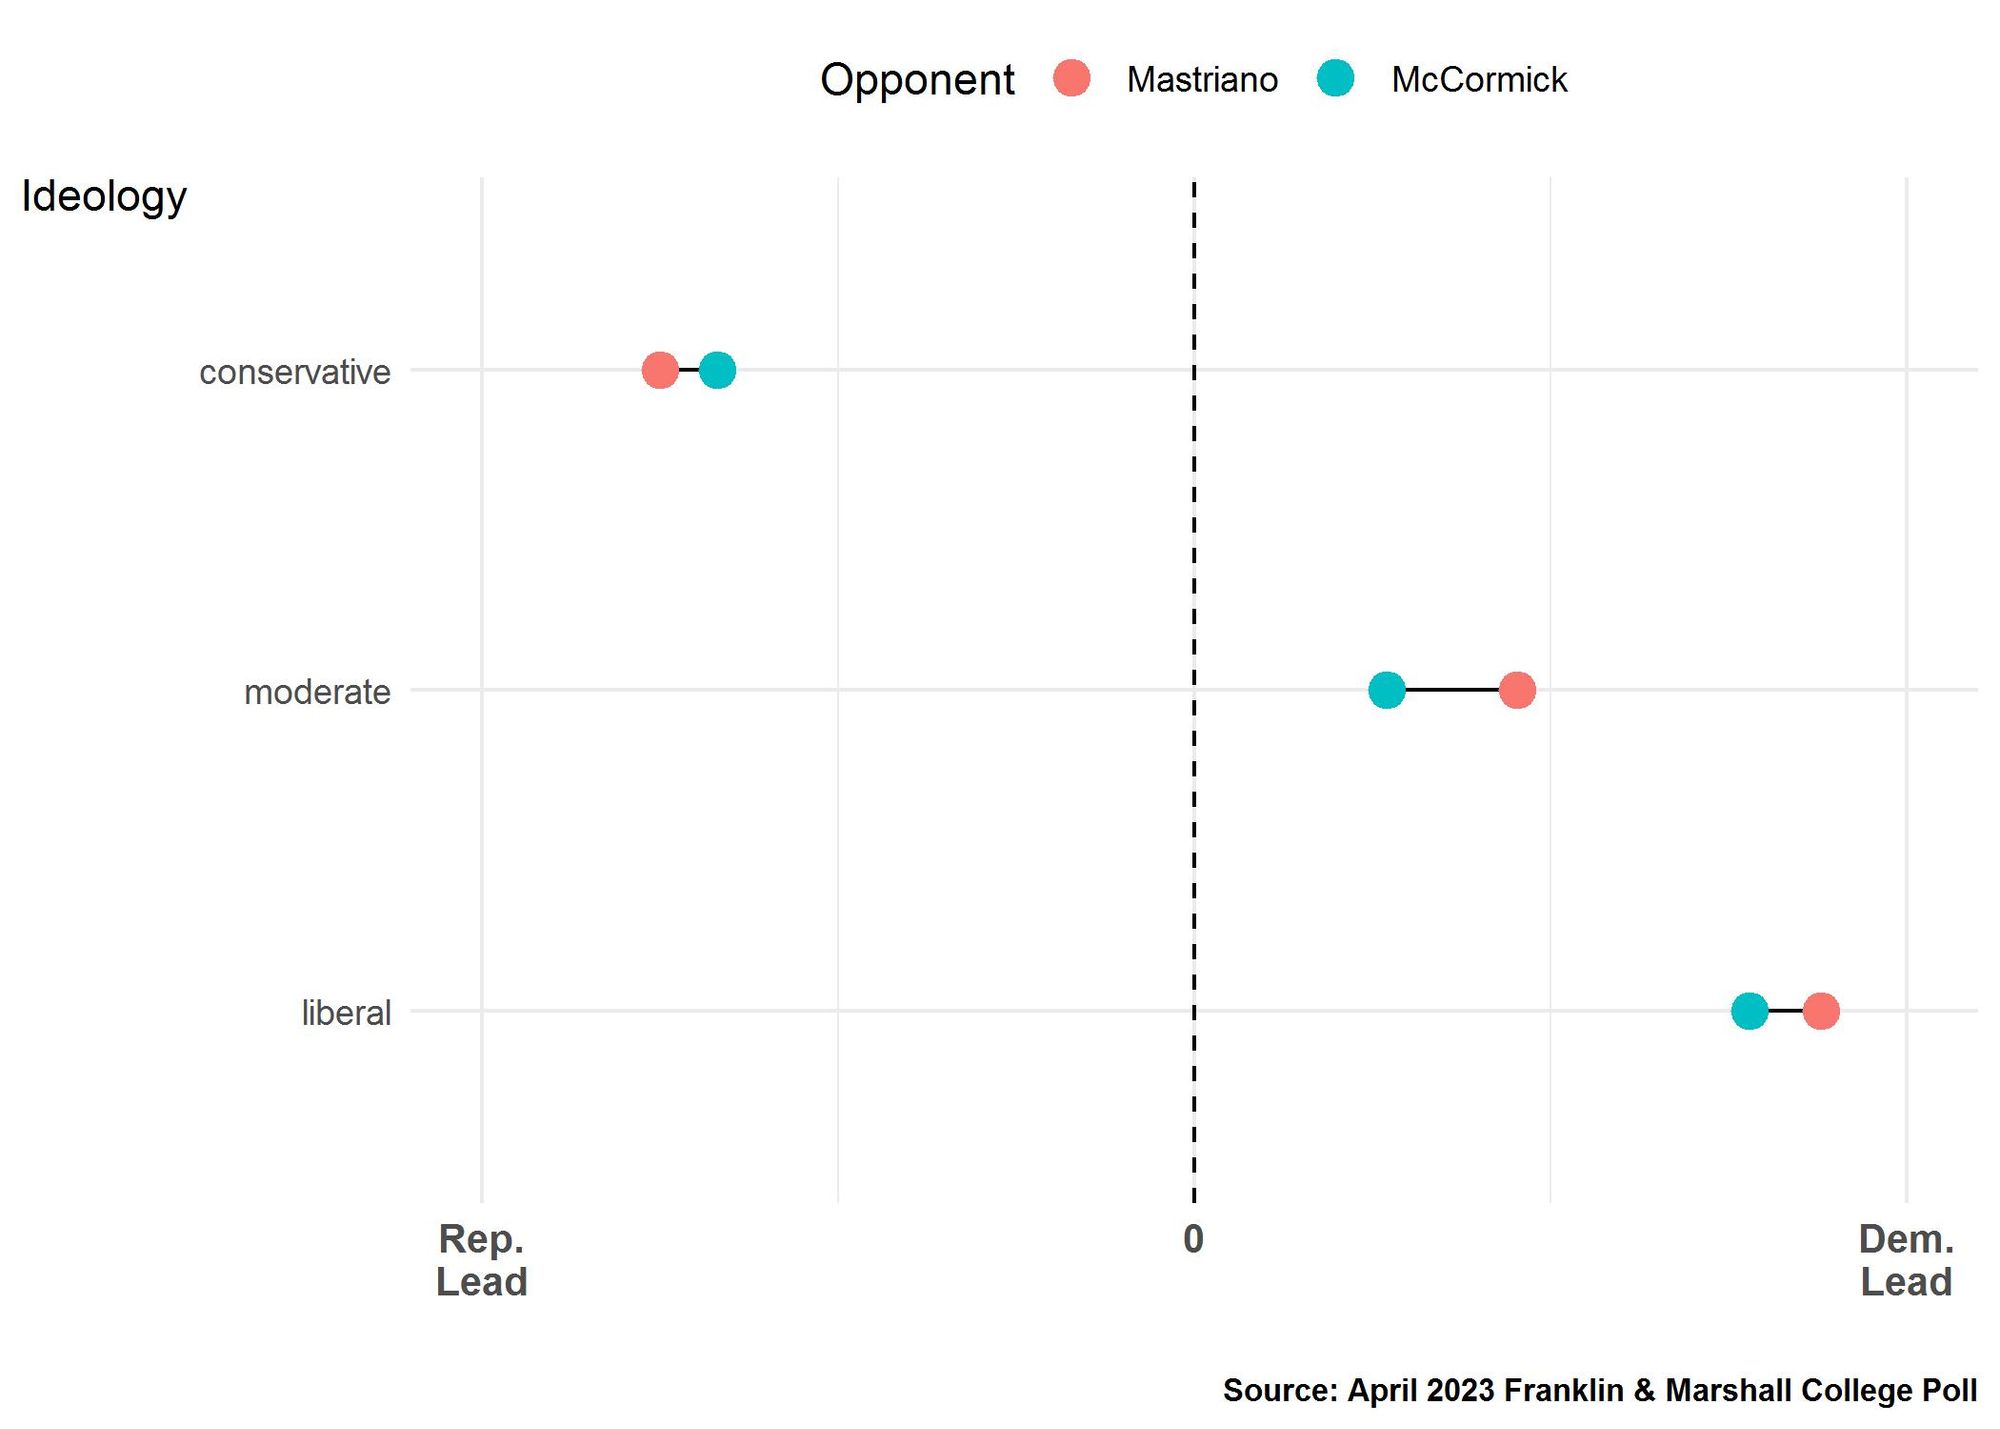 Figure 2. This image compares the relative lead or deficit among ideological groups for Senator Bob Casey when paired against Doug Mastriano or David McCormick.